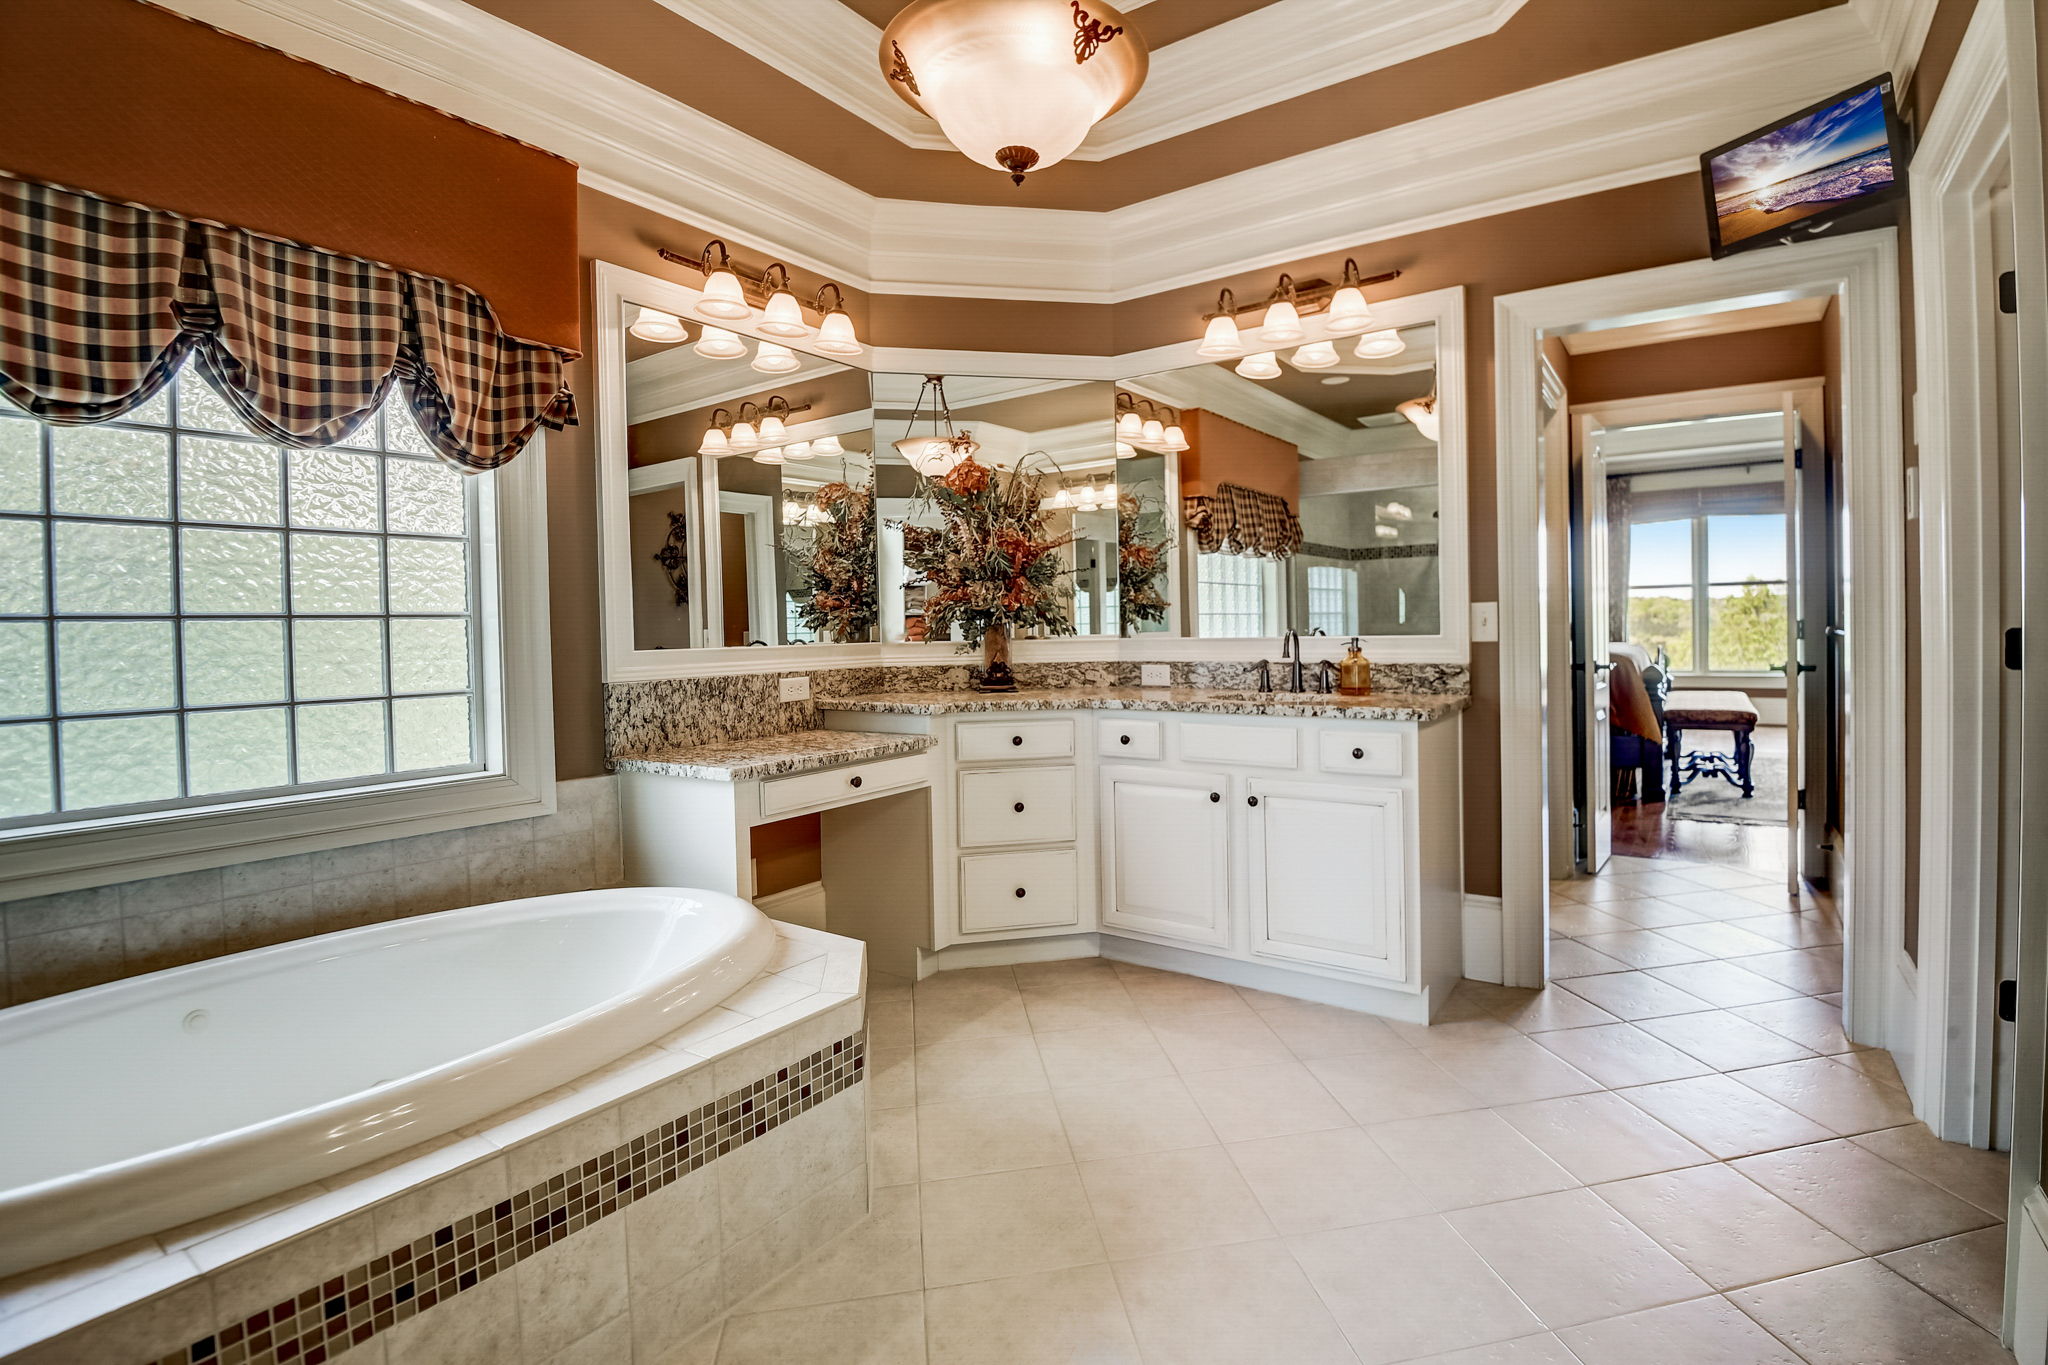 Primary Bathroom with Separate Tiled Shower and Tub, and Double Vanities with Granite Countertops